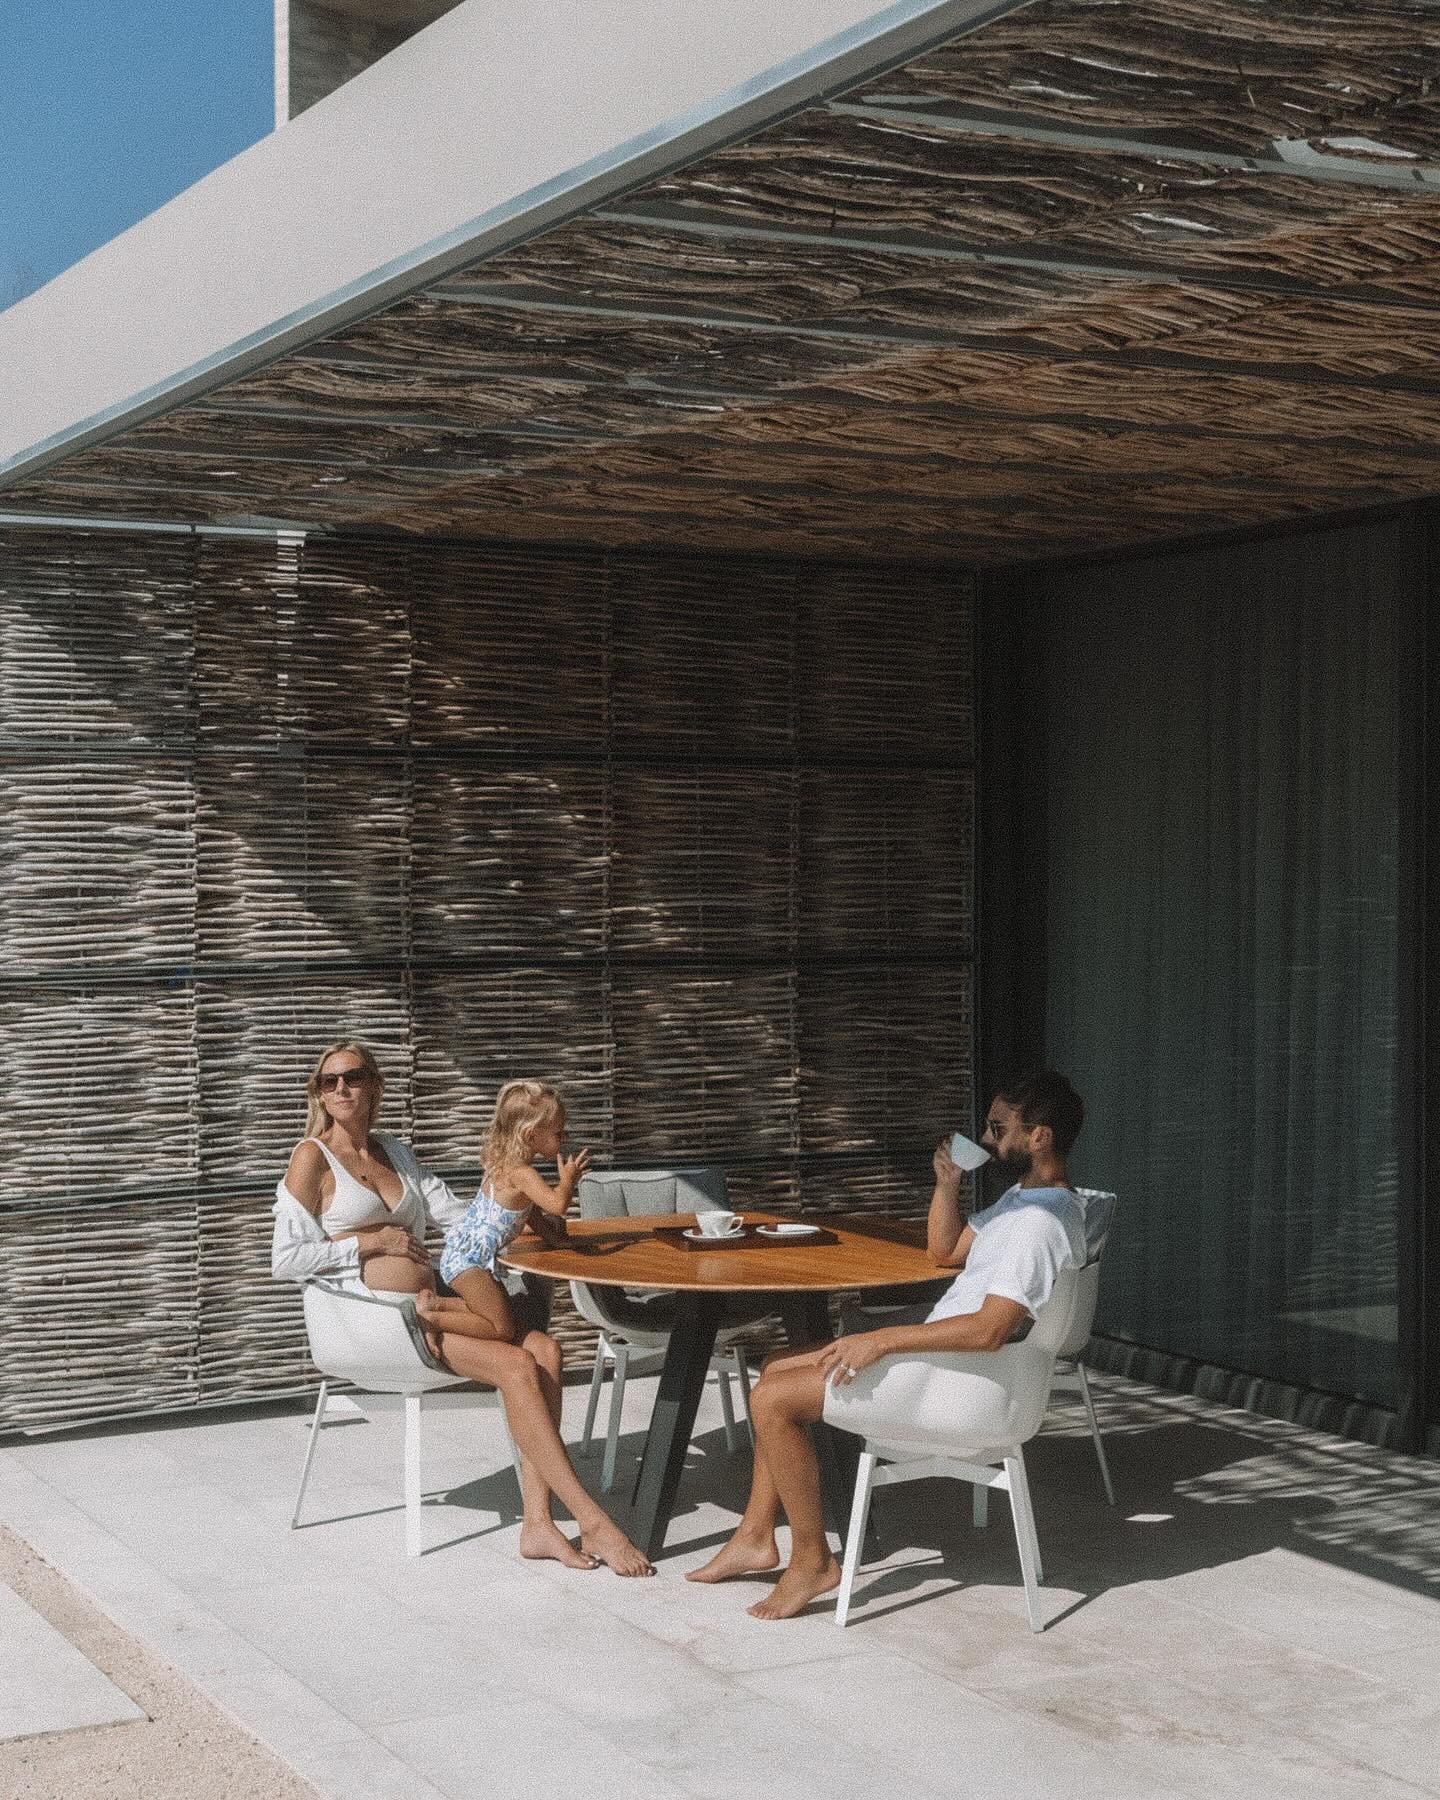 Cabo memories 💭
We fell in love with this stunning property for a few reasons. The aesthetics, the service, the food, the kids club, gym facilities the list really does go on&hellip; how about you, what do you look for when staying at a hotel?

📍 @